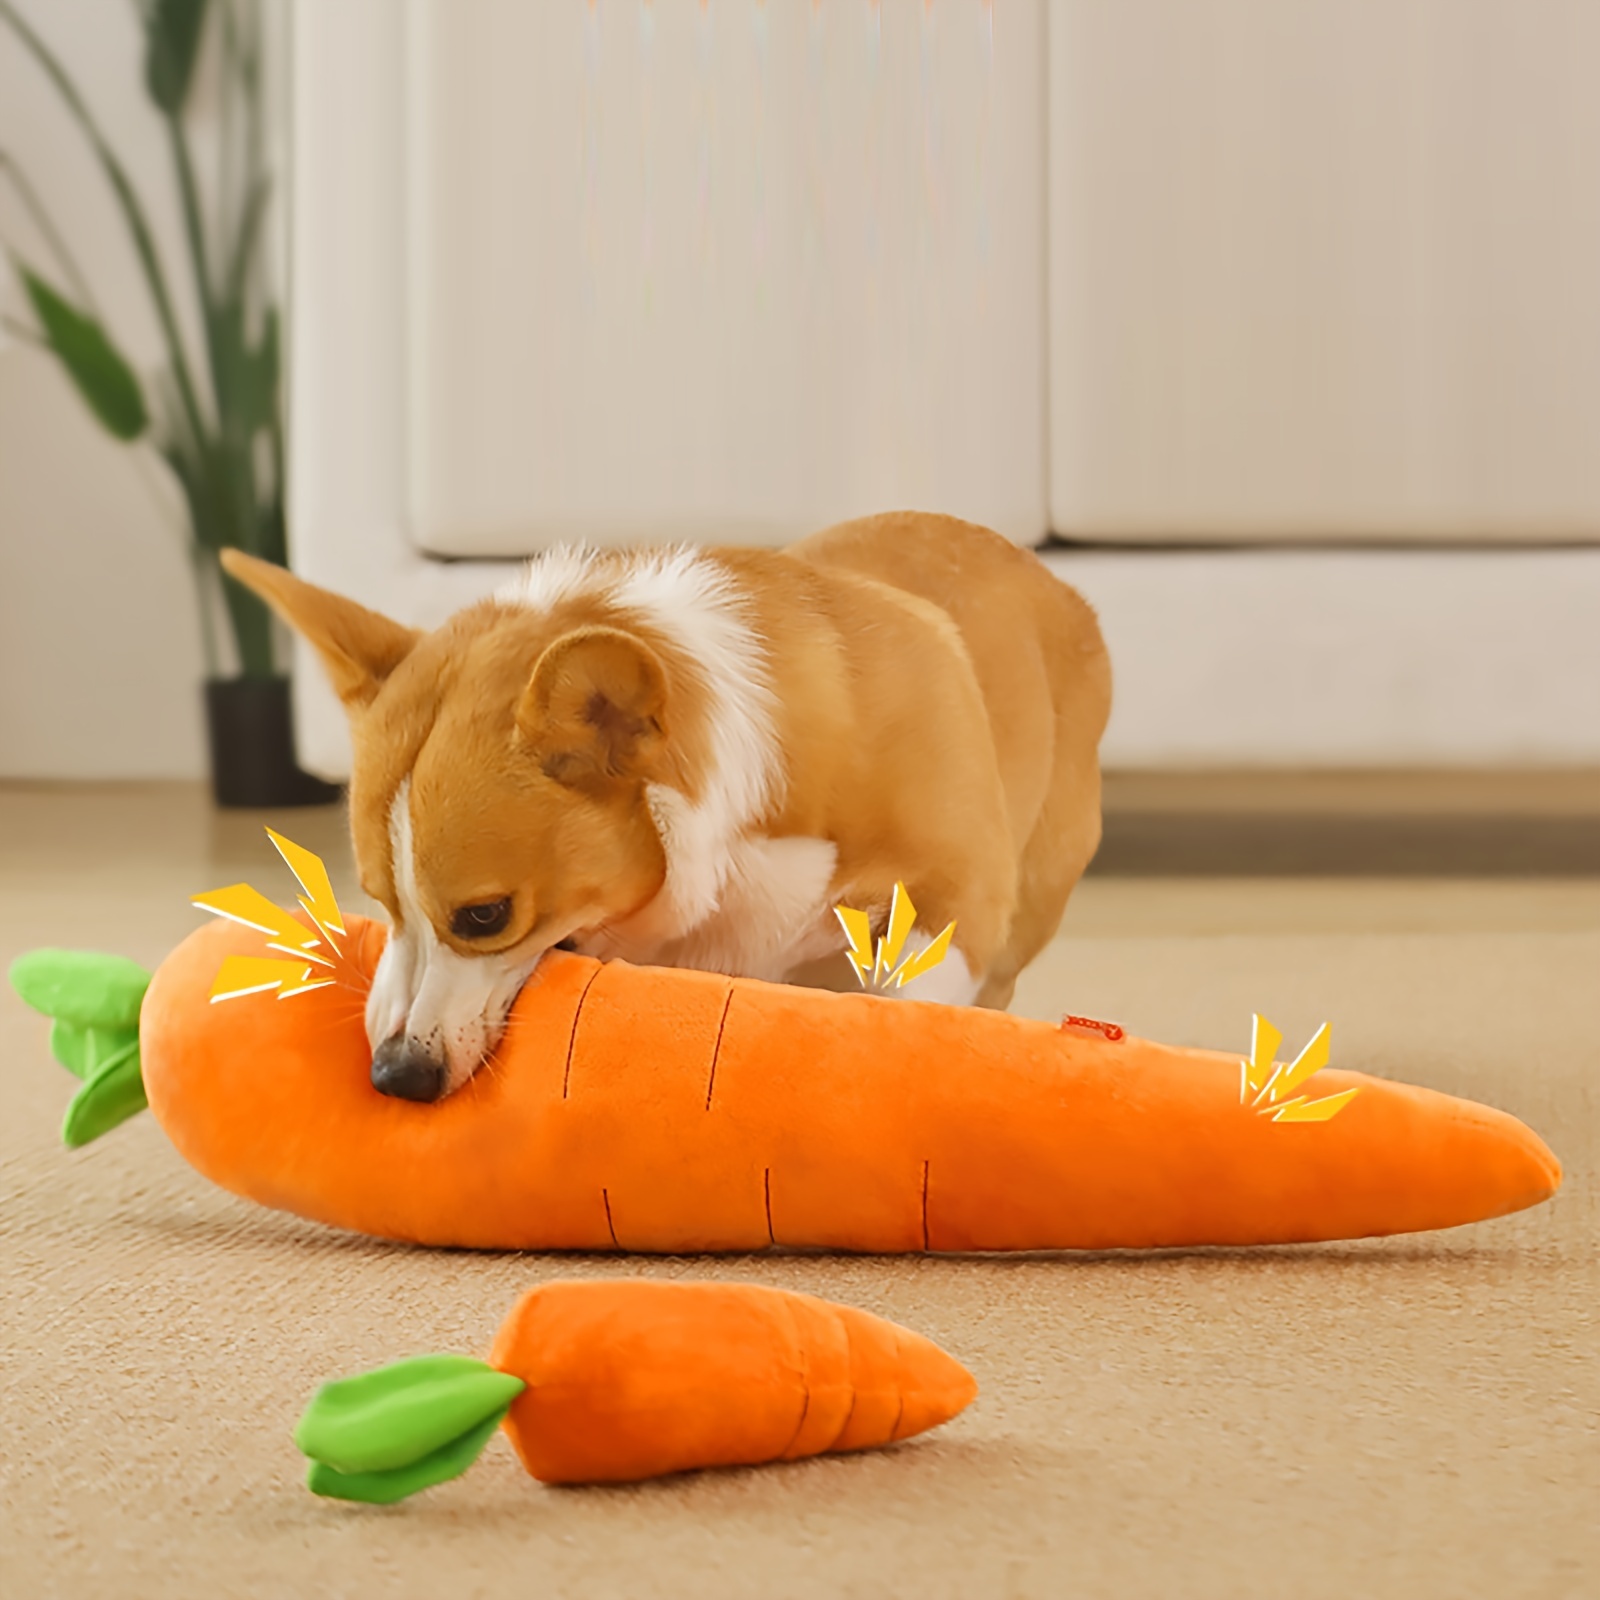 

1pc Cute Carrot Plush Toy For Pets - Soft And Durable Bite Doll For Playtime And Training